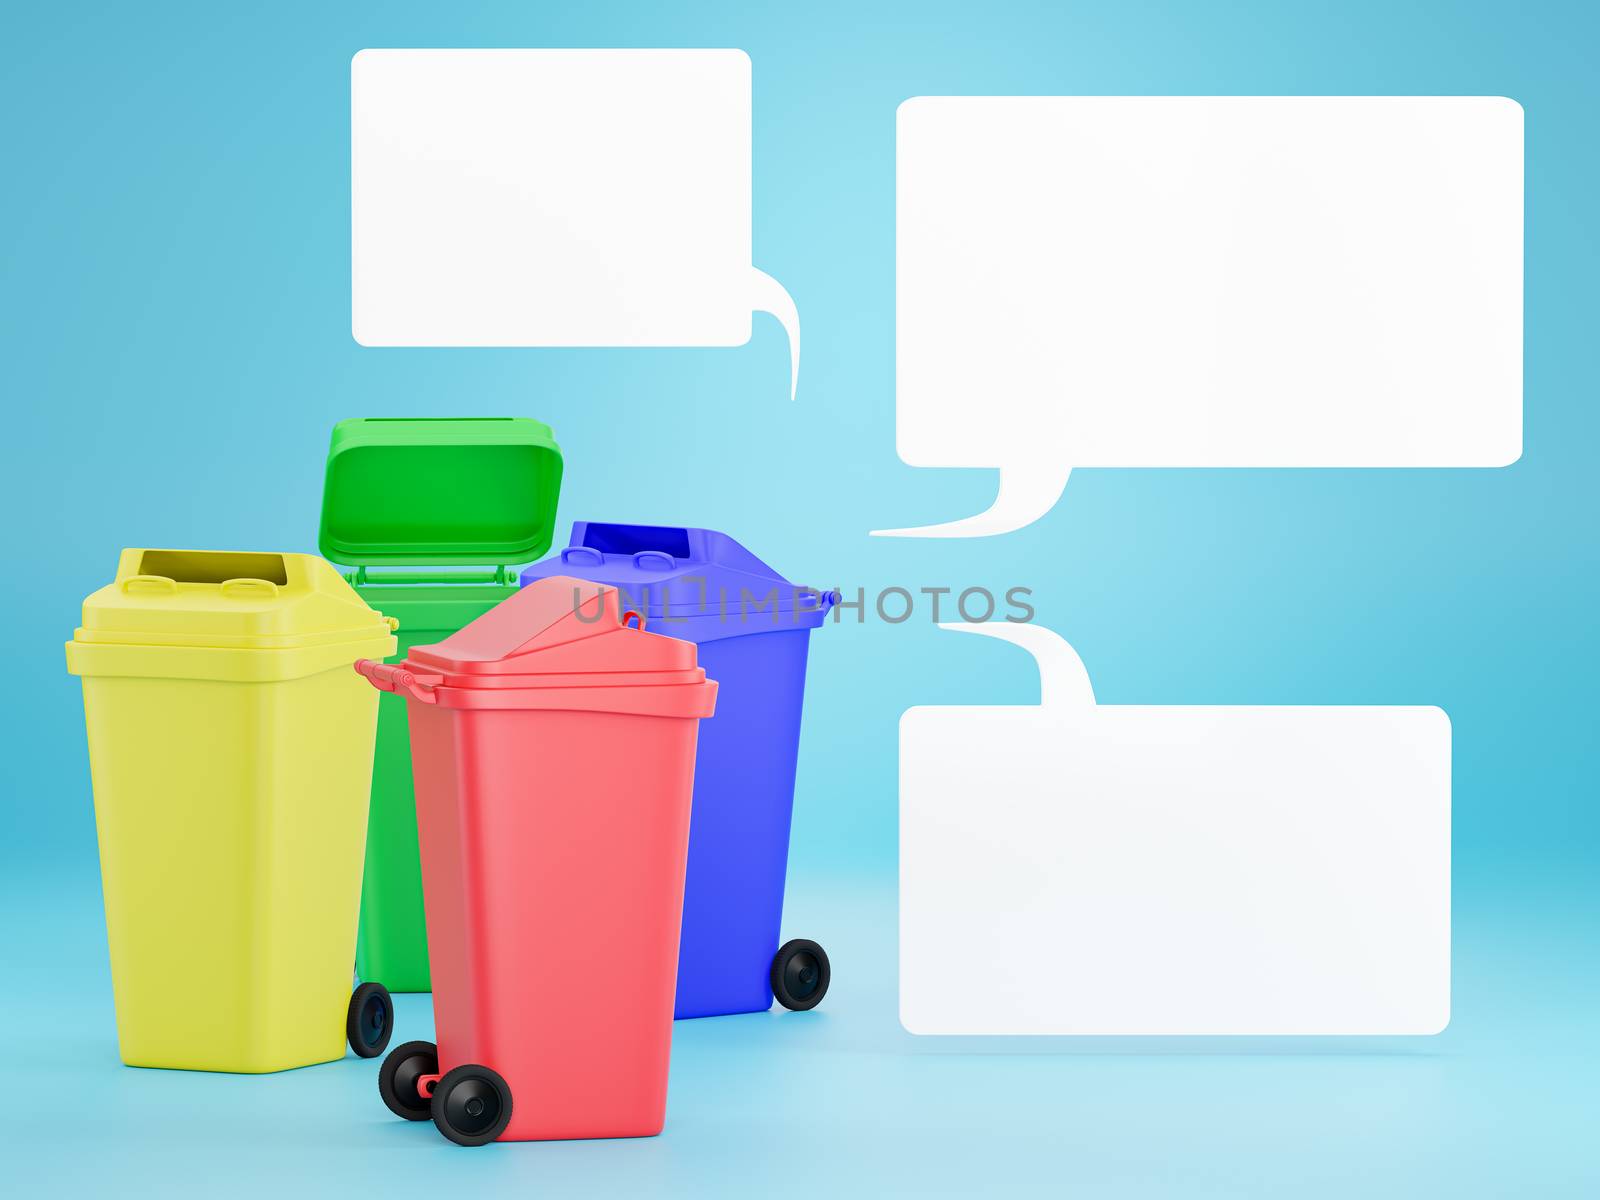 Set of colored bins to separate each type of waste for easier recycling. by SaitanSainam